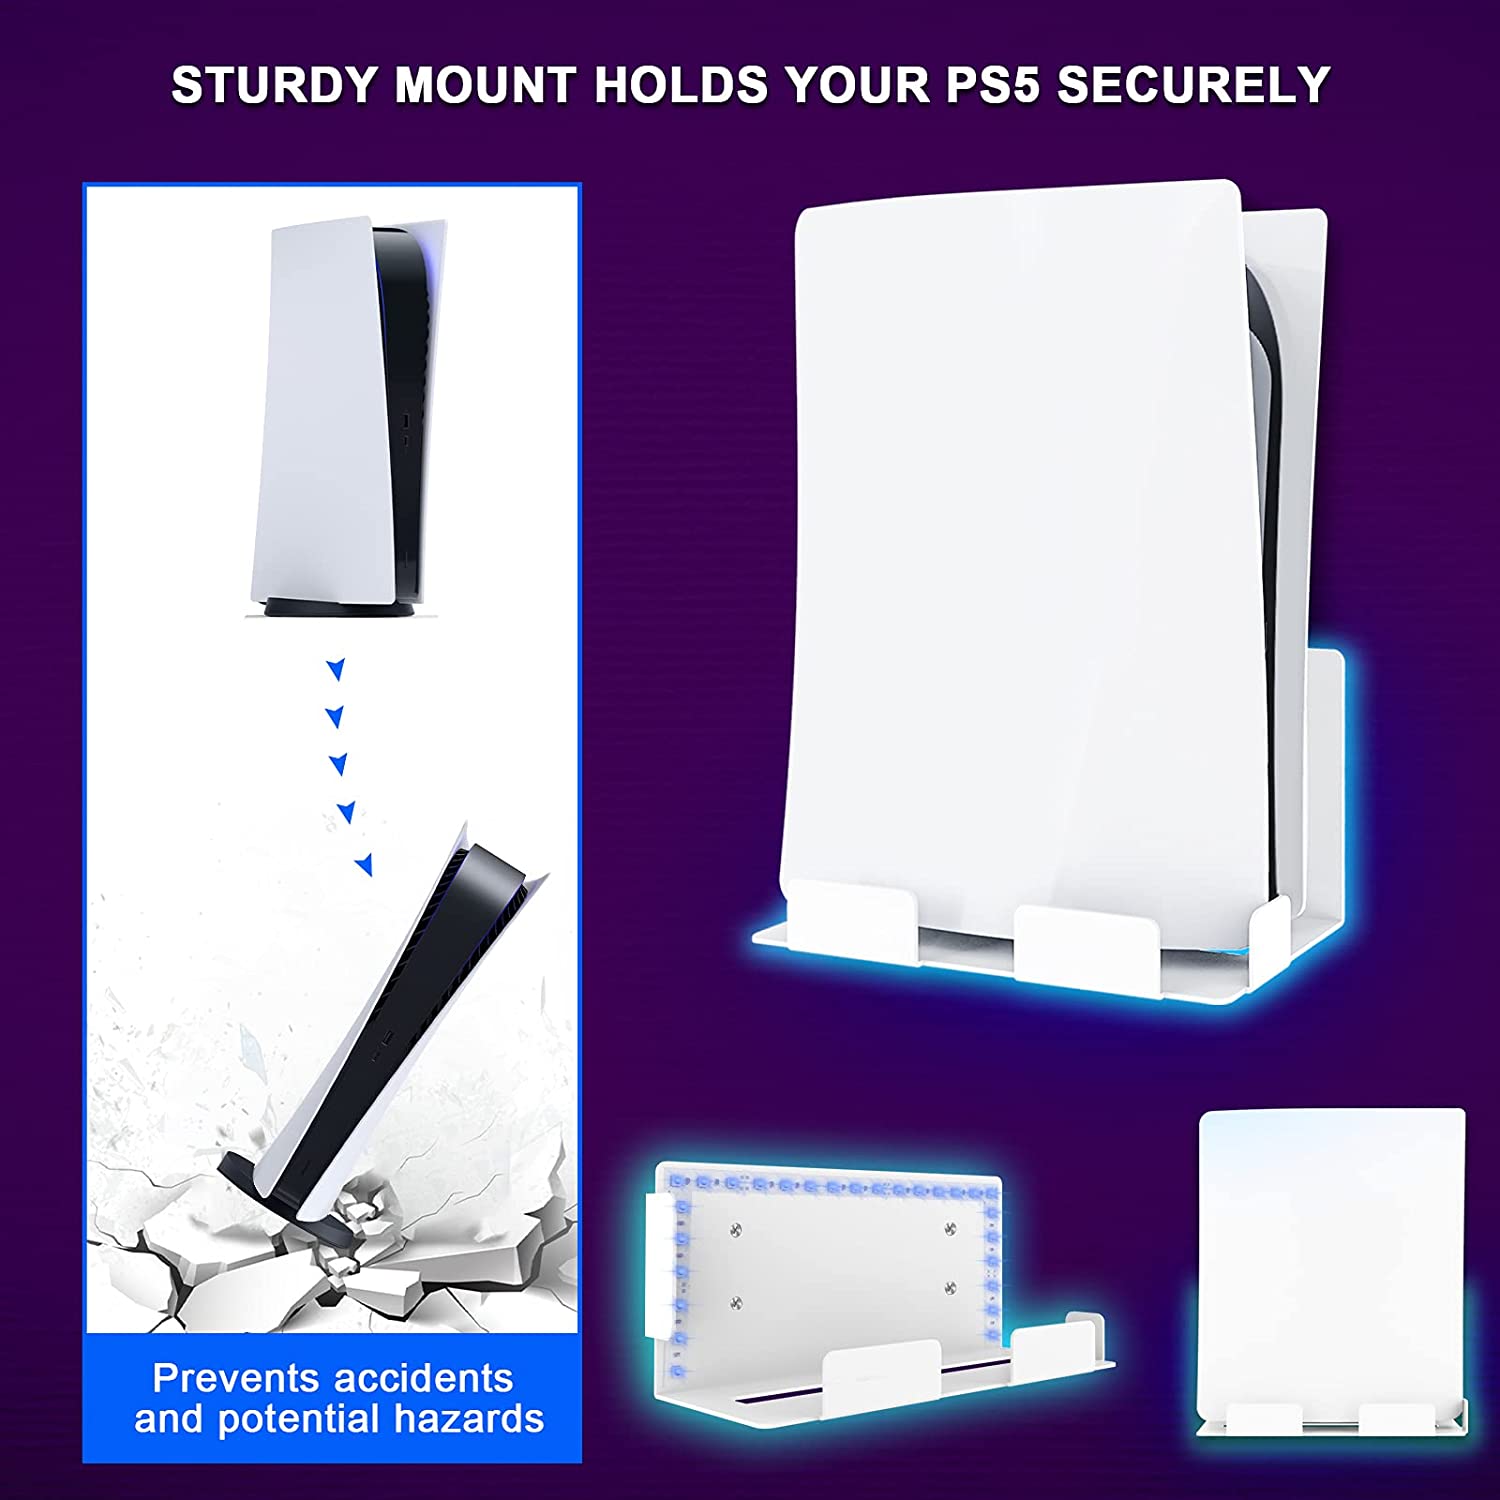 Sturdy mounts hold your PS5 securely in place.